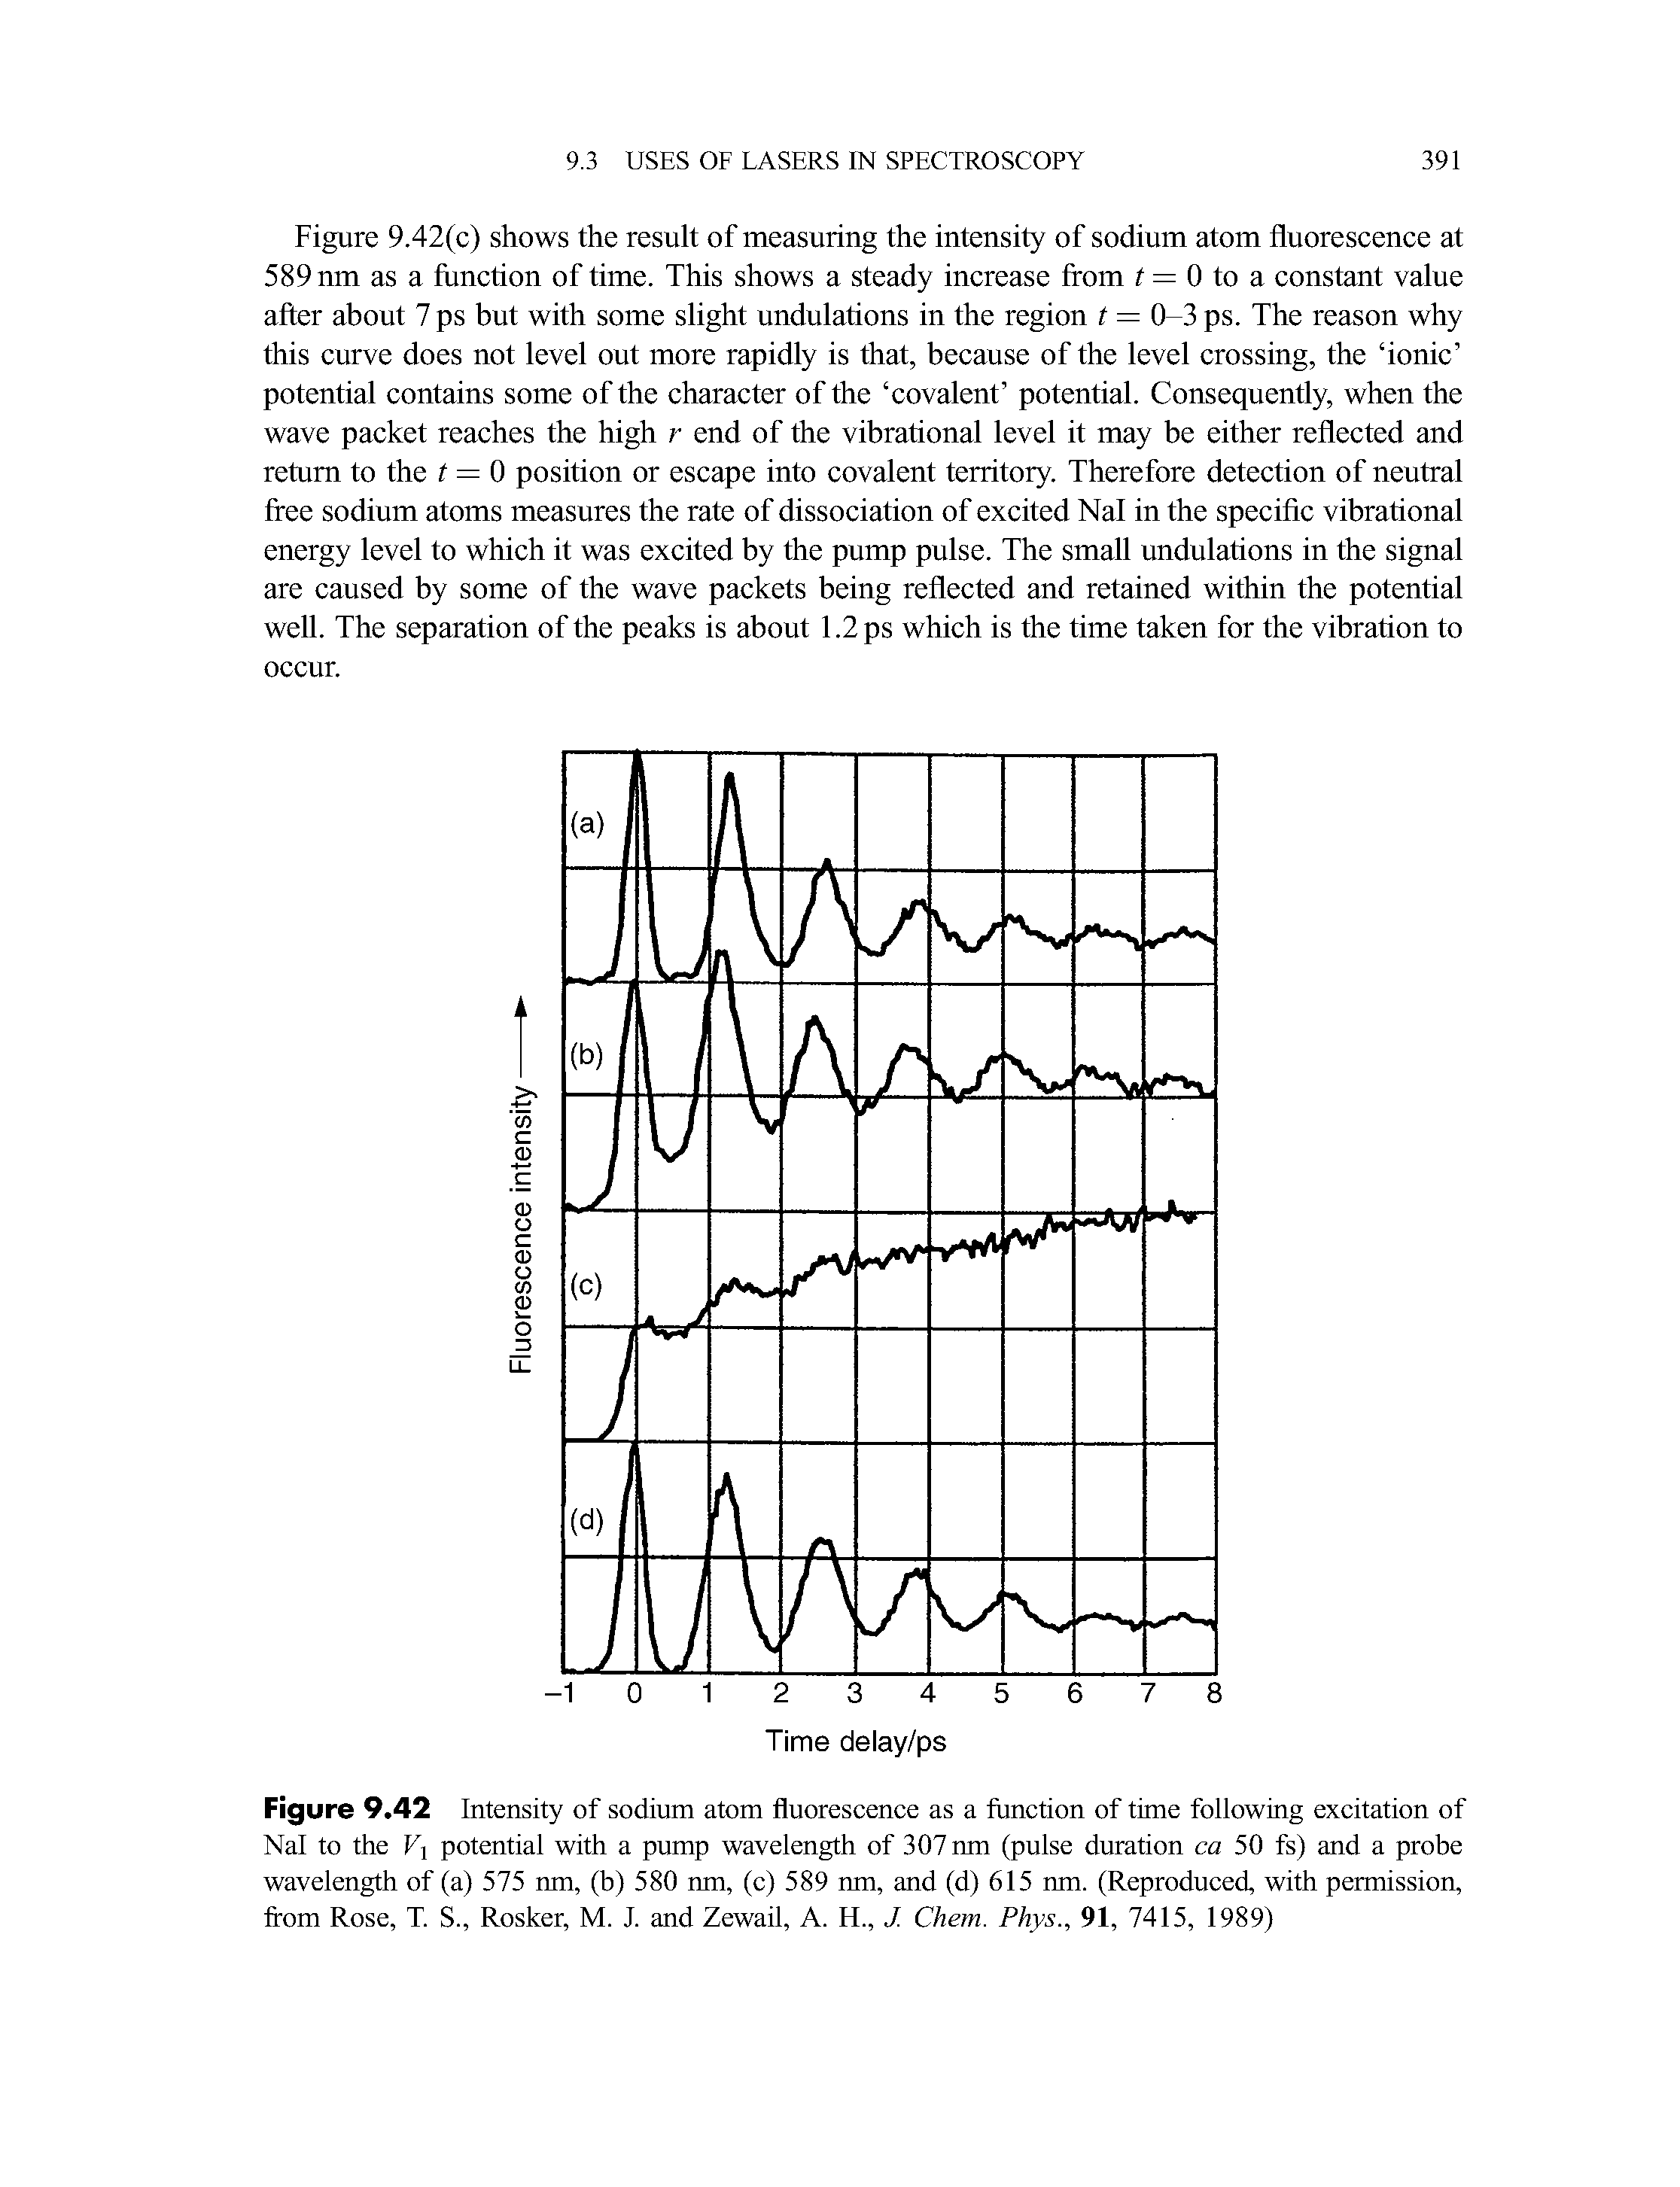 Figure 9.42 Intensity of sodium atom fluorescence as a function of time following excitation of Nal to the V potential with a pump wavelength of 307 nm (pulse duration ca 50 fs) and a probe wavelength of (a) 575 nm, (b) 580 nm, (c) 589 nm, and (d) 615 nm. (Reproduced, with permission, from Rose, T. S., Rosker, M. J. and Zewail, A. H., J. Chem. Phys., 91, 7415, 1989)...